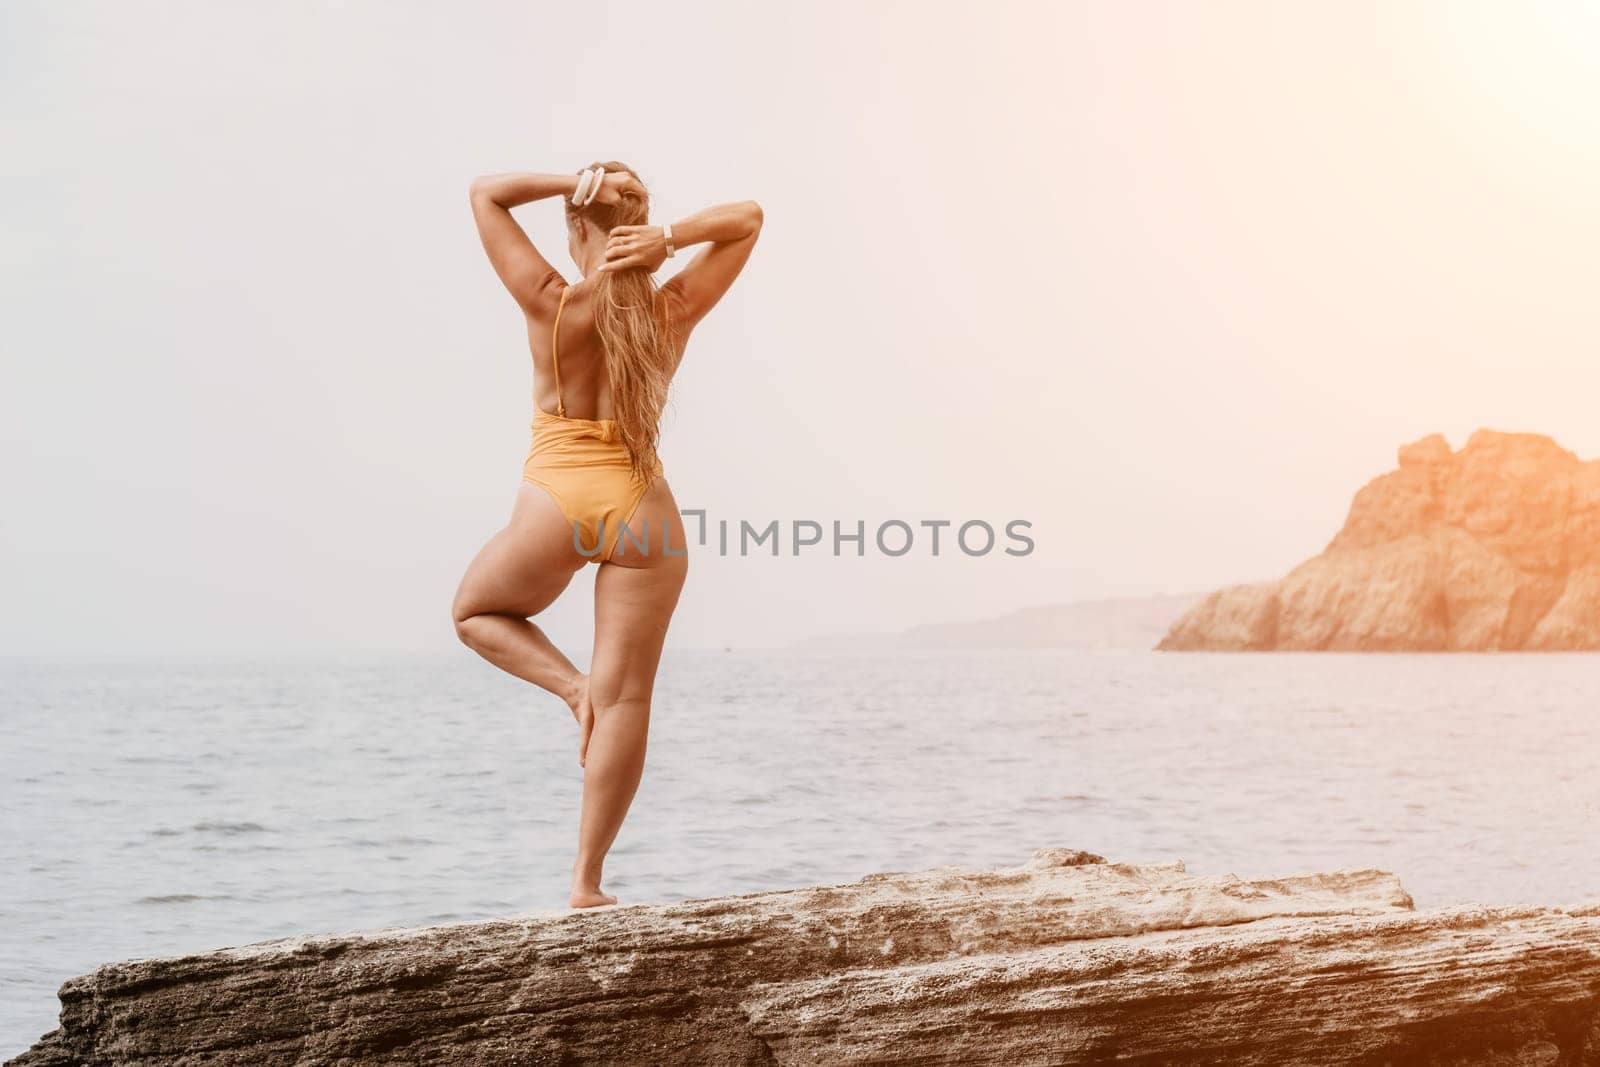 Woman meditating in yoga pose silhouette at the ocean, beach and rock mountains. Motivation and inspirational fit and exercising. Healthy lifestyle outdoors in nature, fitness concept.